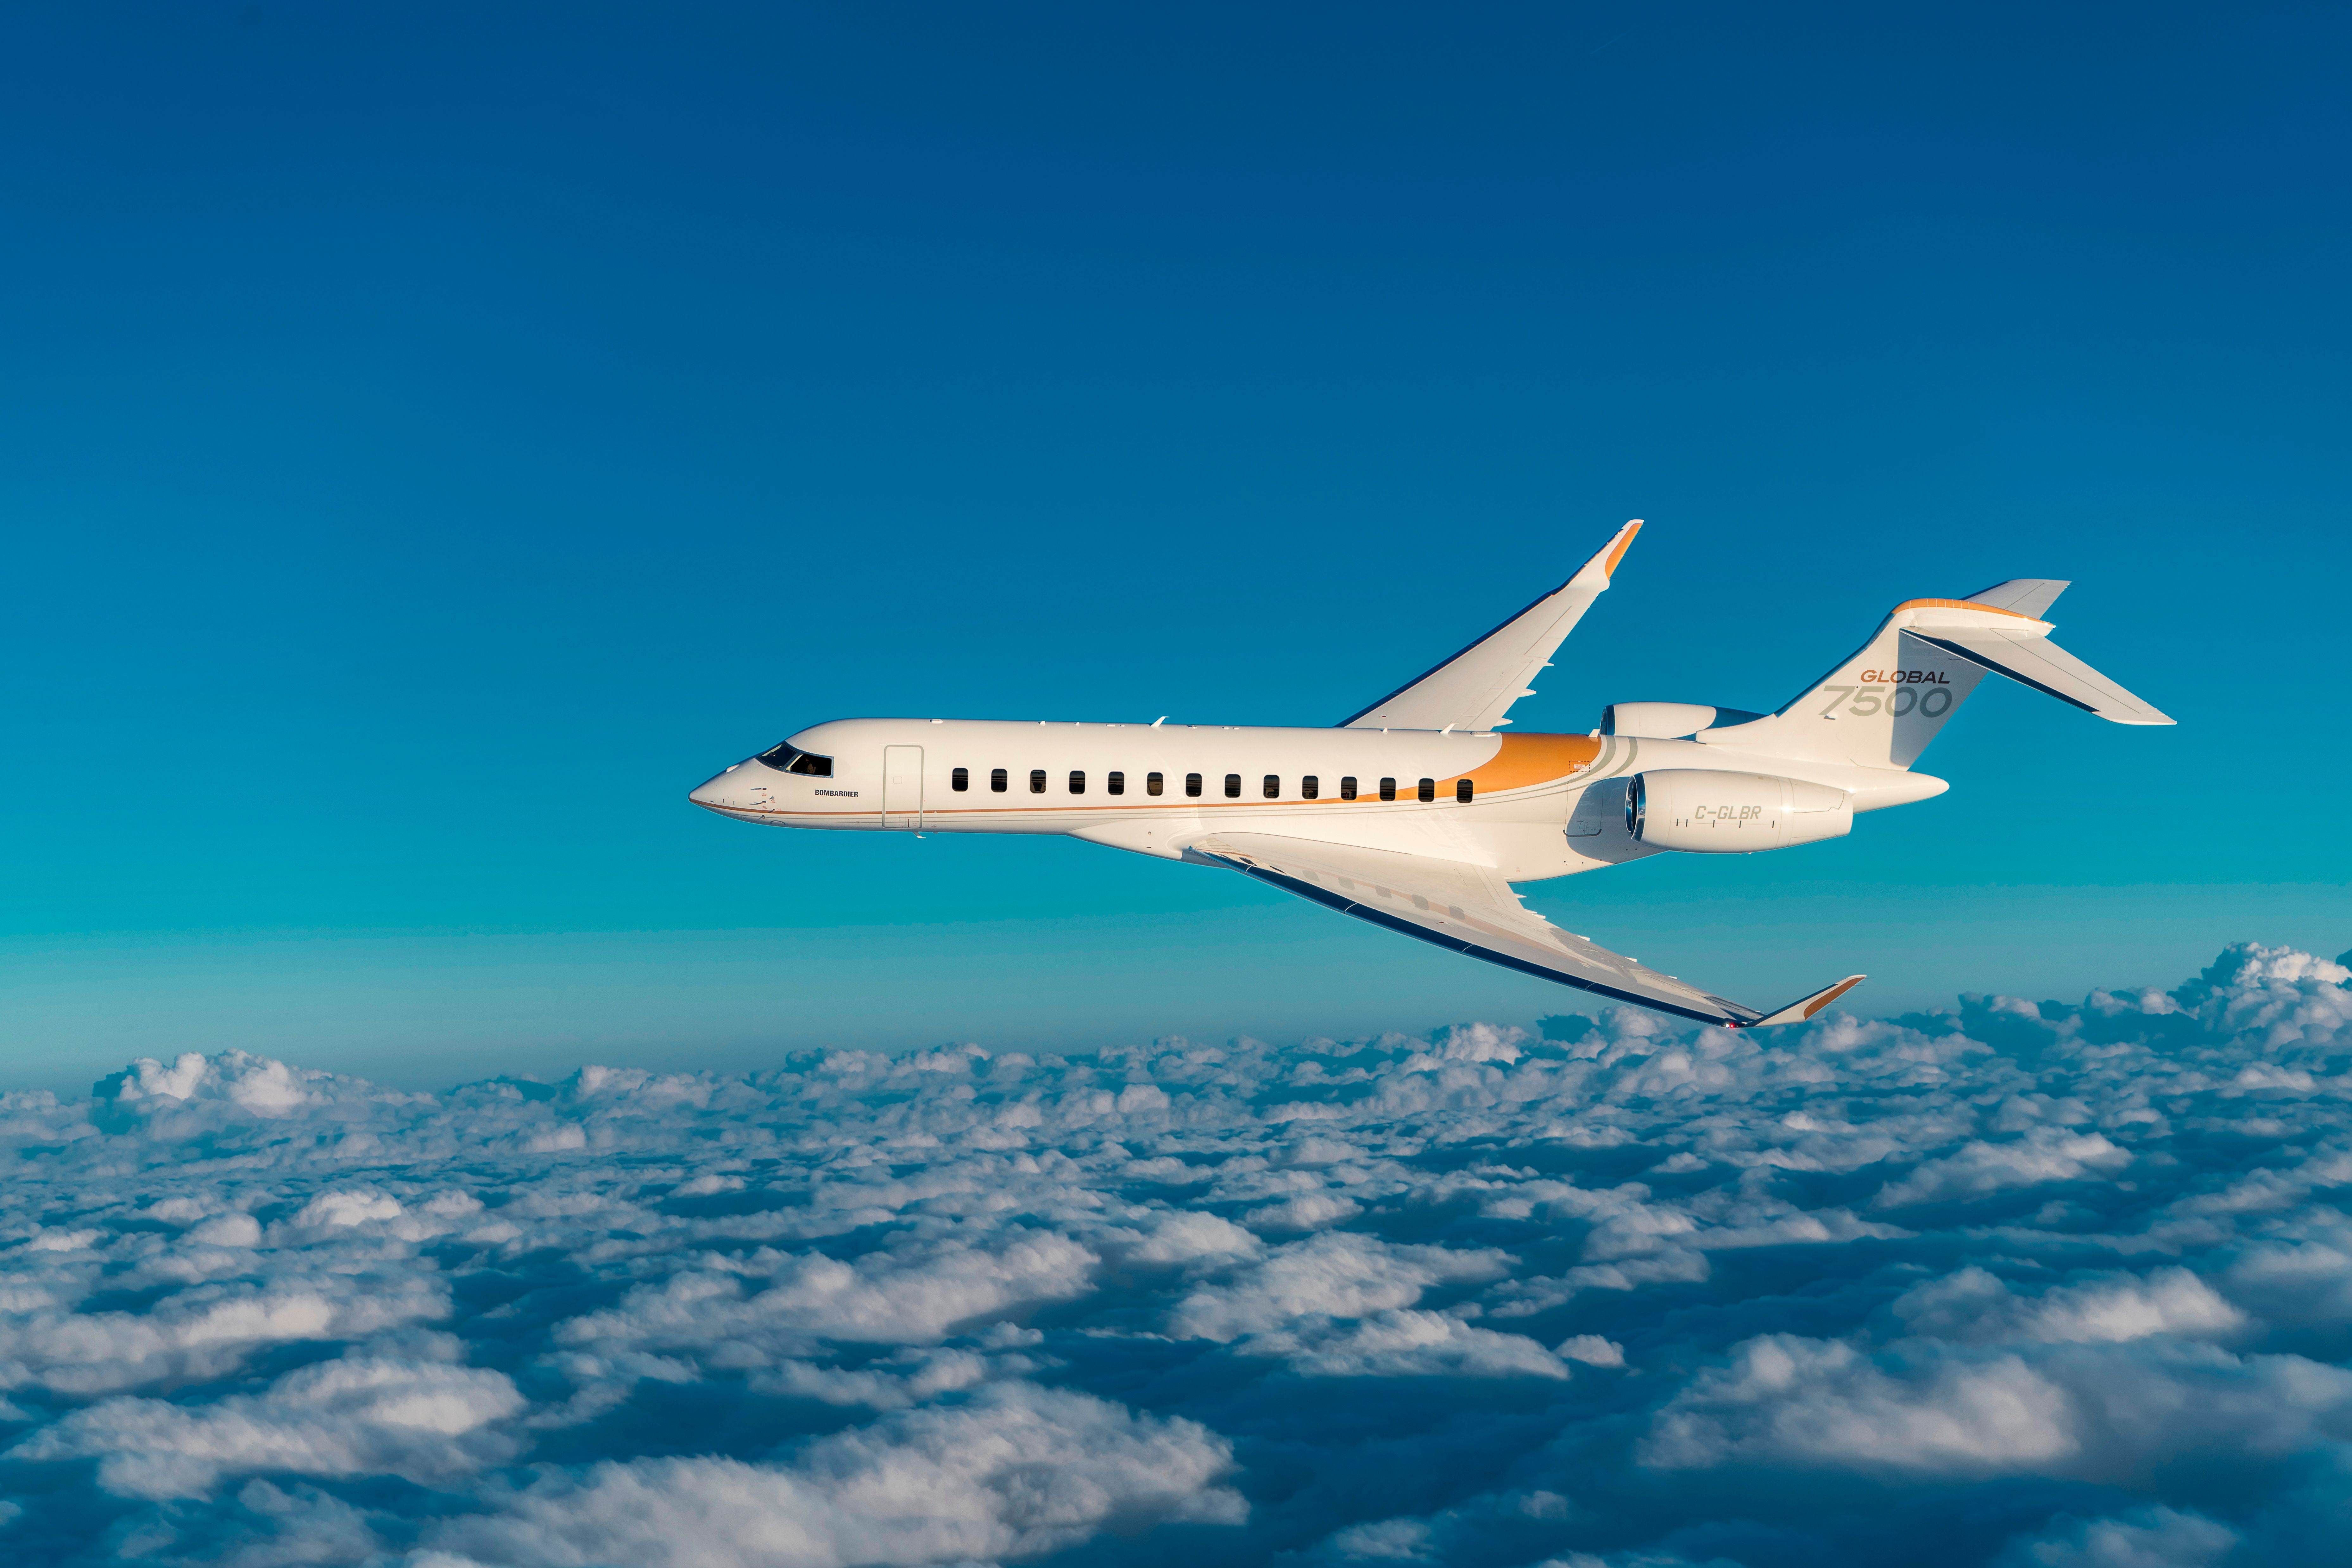 A Bombardier Global 7500 flying above the clouds.